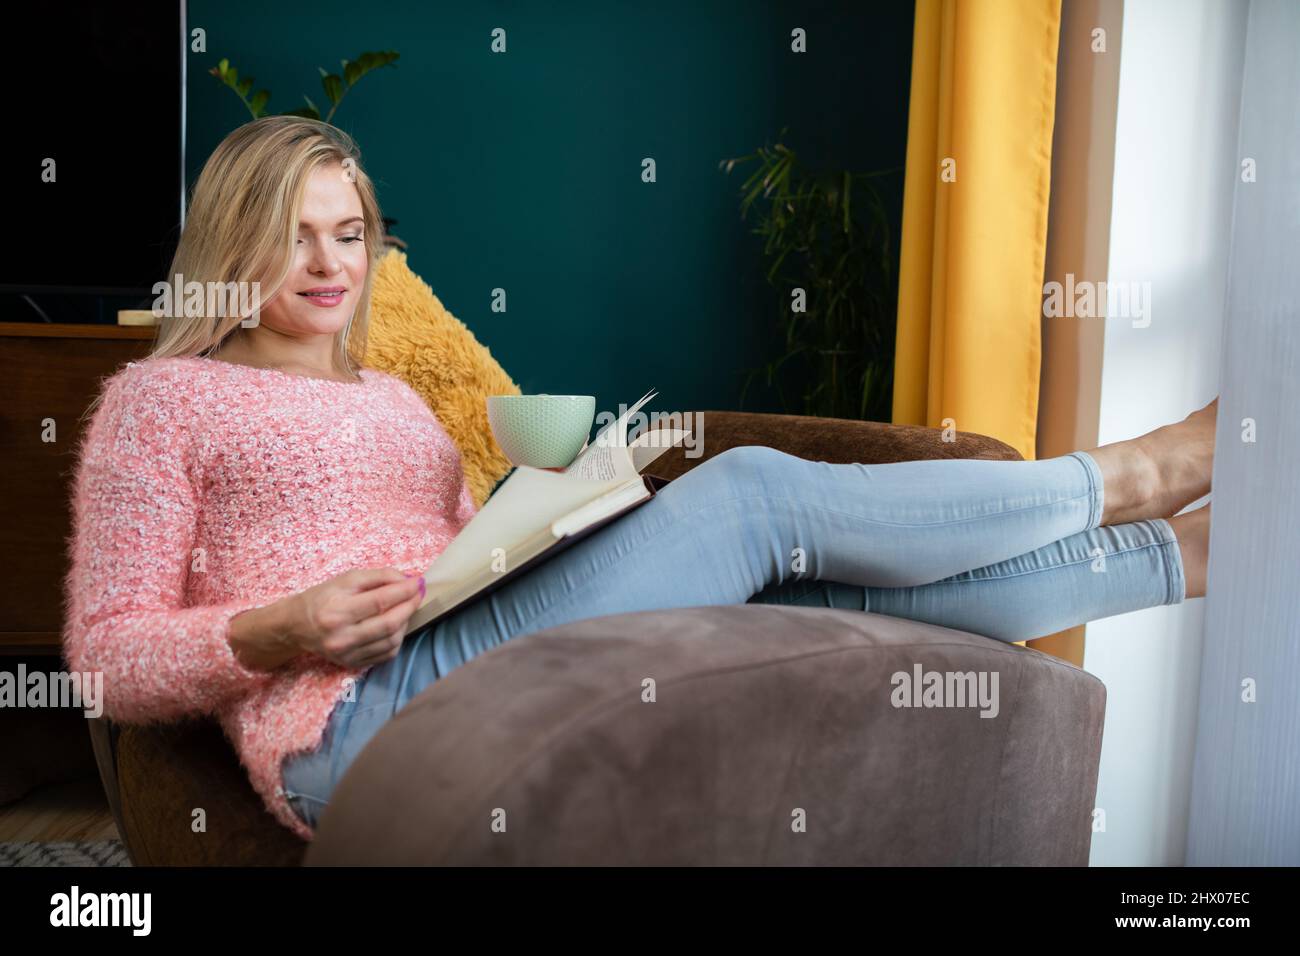 A girl reads a book with a cup in her hand while resting. Stock Photo